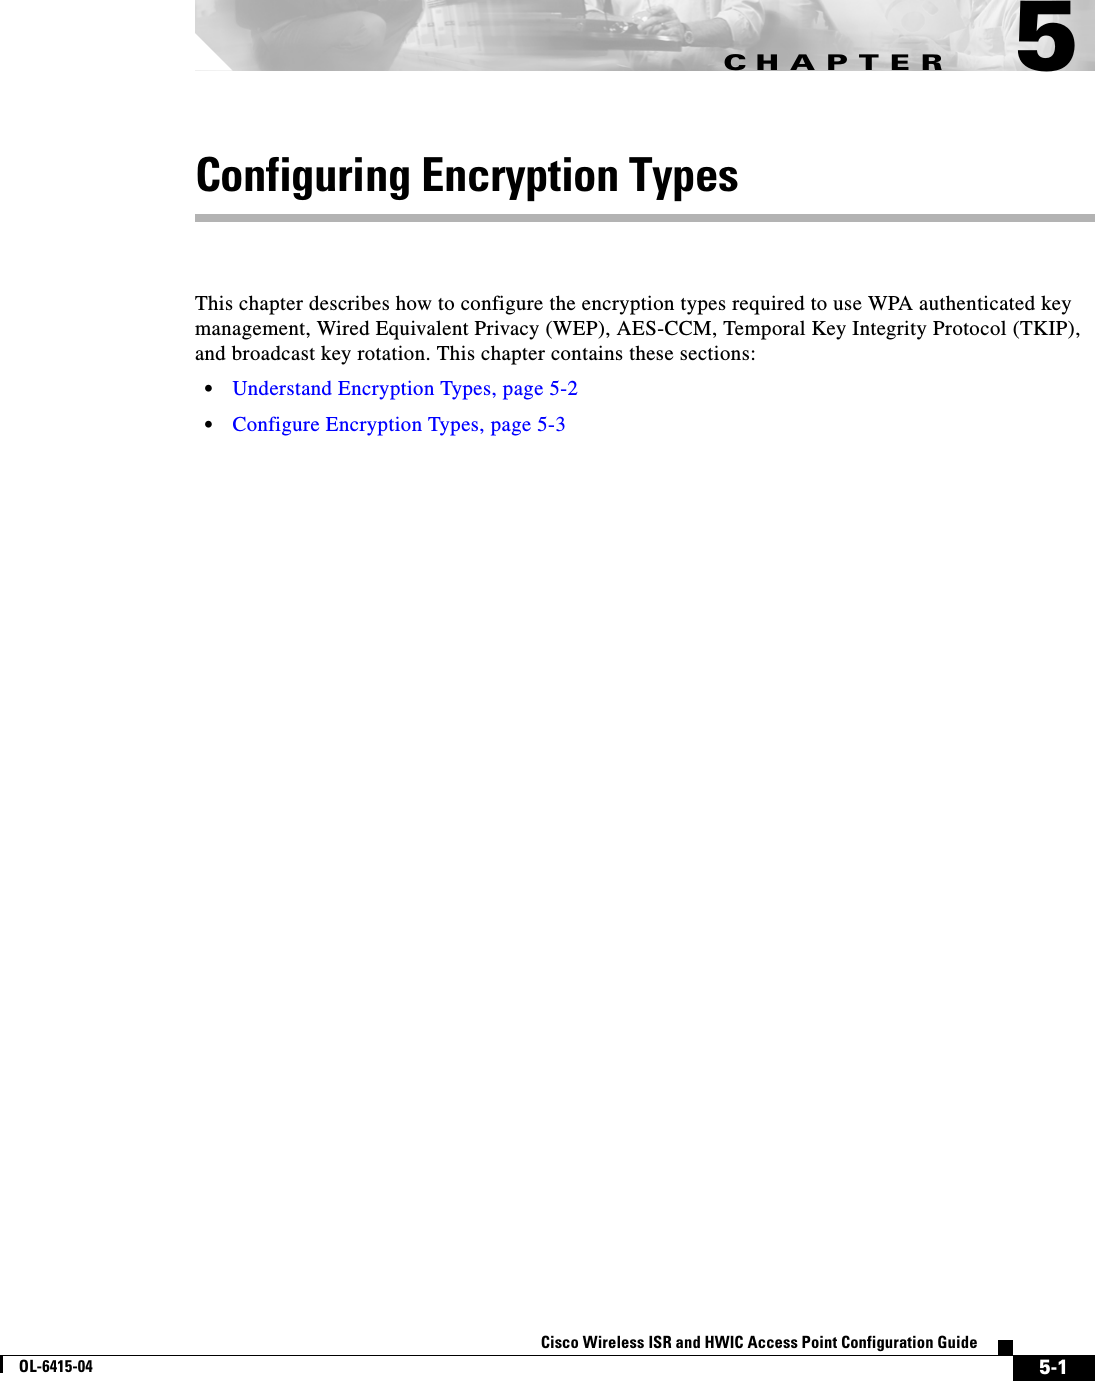 CHAPTER 5-1Cisco Wireless ISR and HWIC Access Point Configuration GuideOL-6415-045Configuring Encryption TypesThis chapter describes how to configure the encryption types required to use WPA authenticated key management, Wired Equivalent Privacy (WEP), AES-CCM, Temporal Key Integrity Protocol (TKIP), and broadcast key rotation. This chapter contains these sections:  • Understand Encryption Types, page 5-2  • Configure Encryption Types, page 5-3